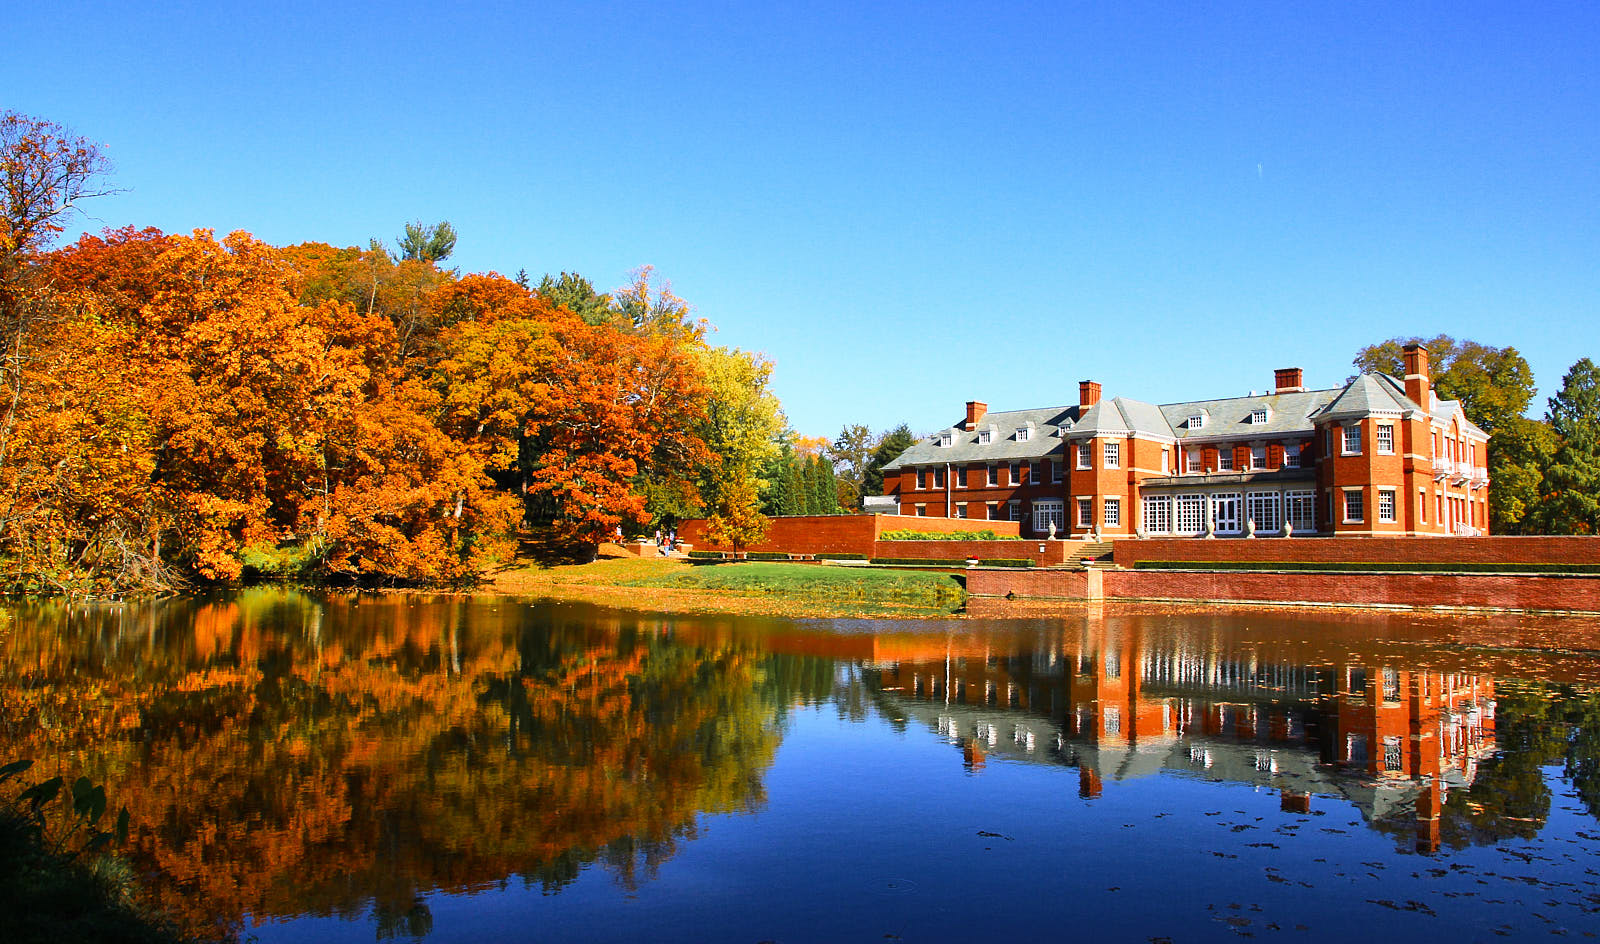 Pond, brick mansion, and forest in the fall